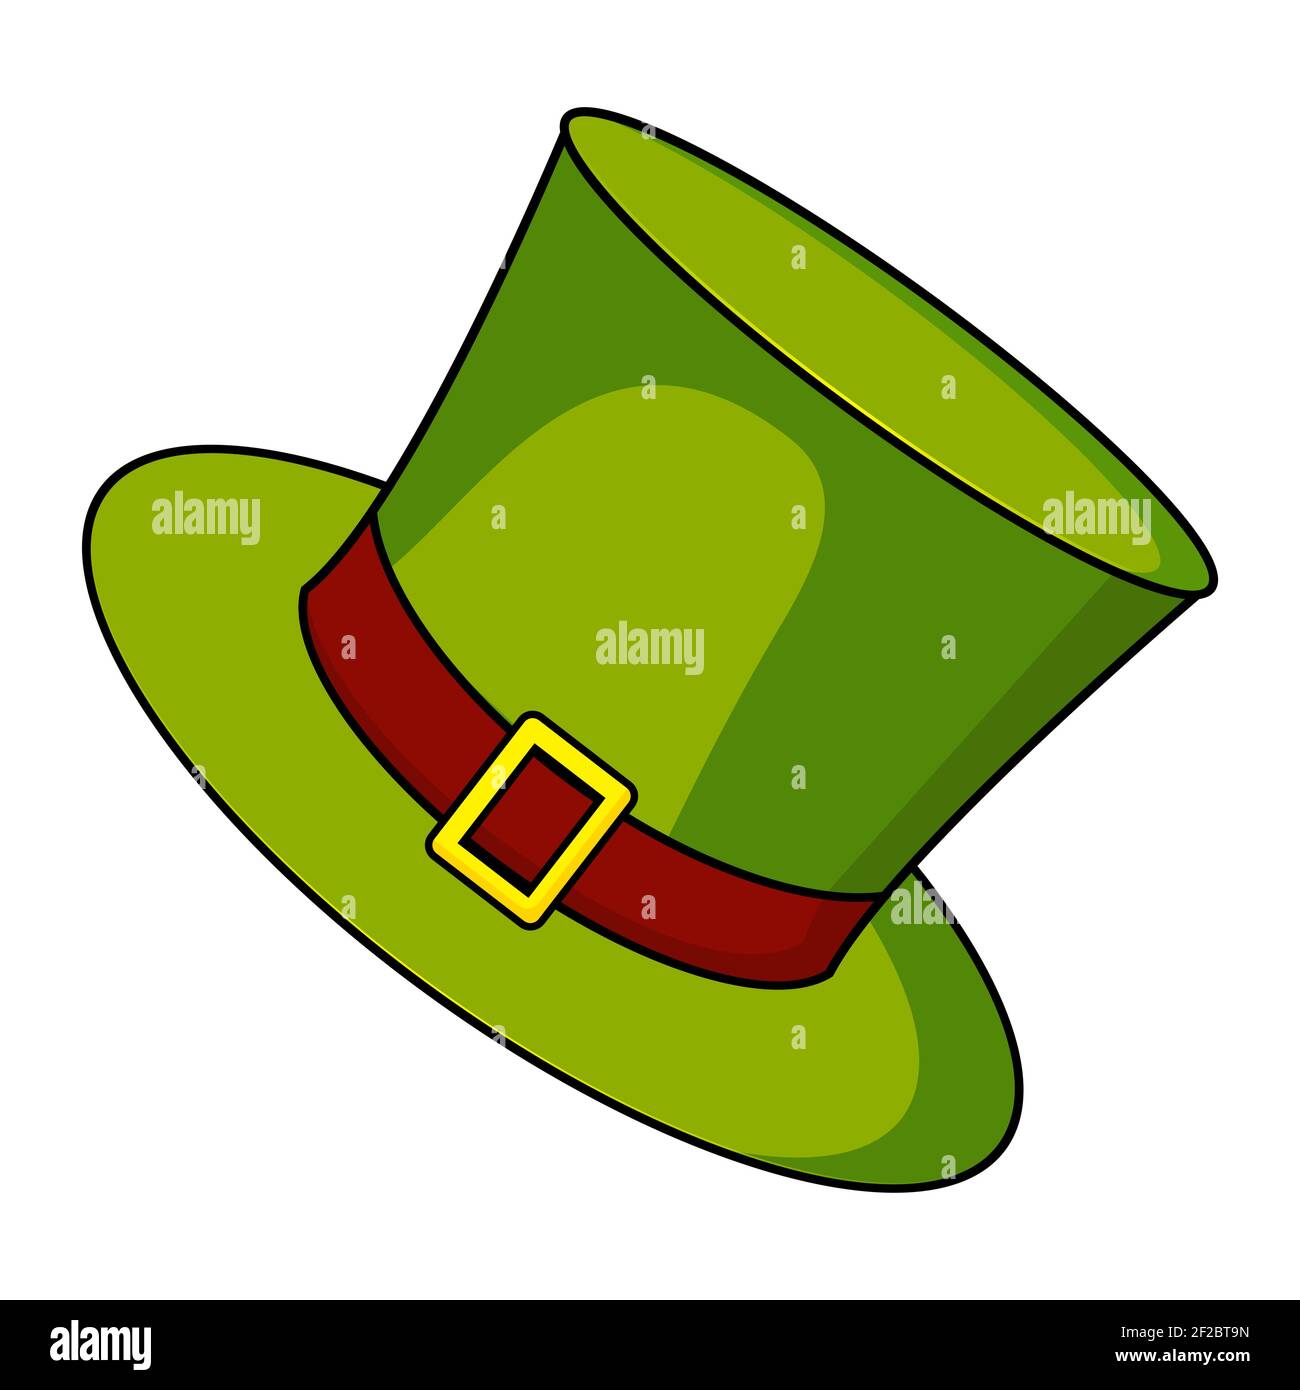 Hat icon for st patrick day. Green cylinder - sybol of irish holiday. Vector cartoon illustration isolated on white background. Stock Vector